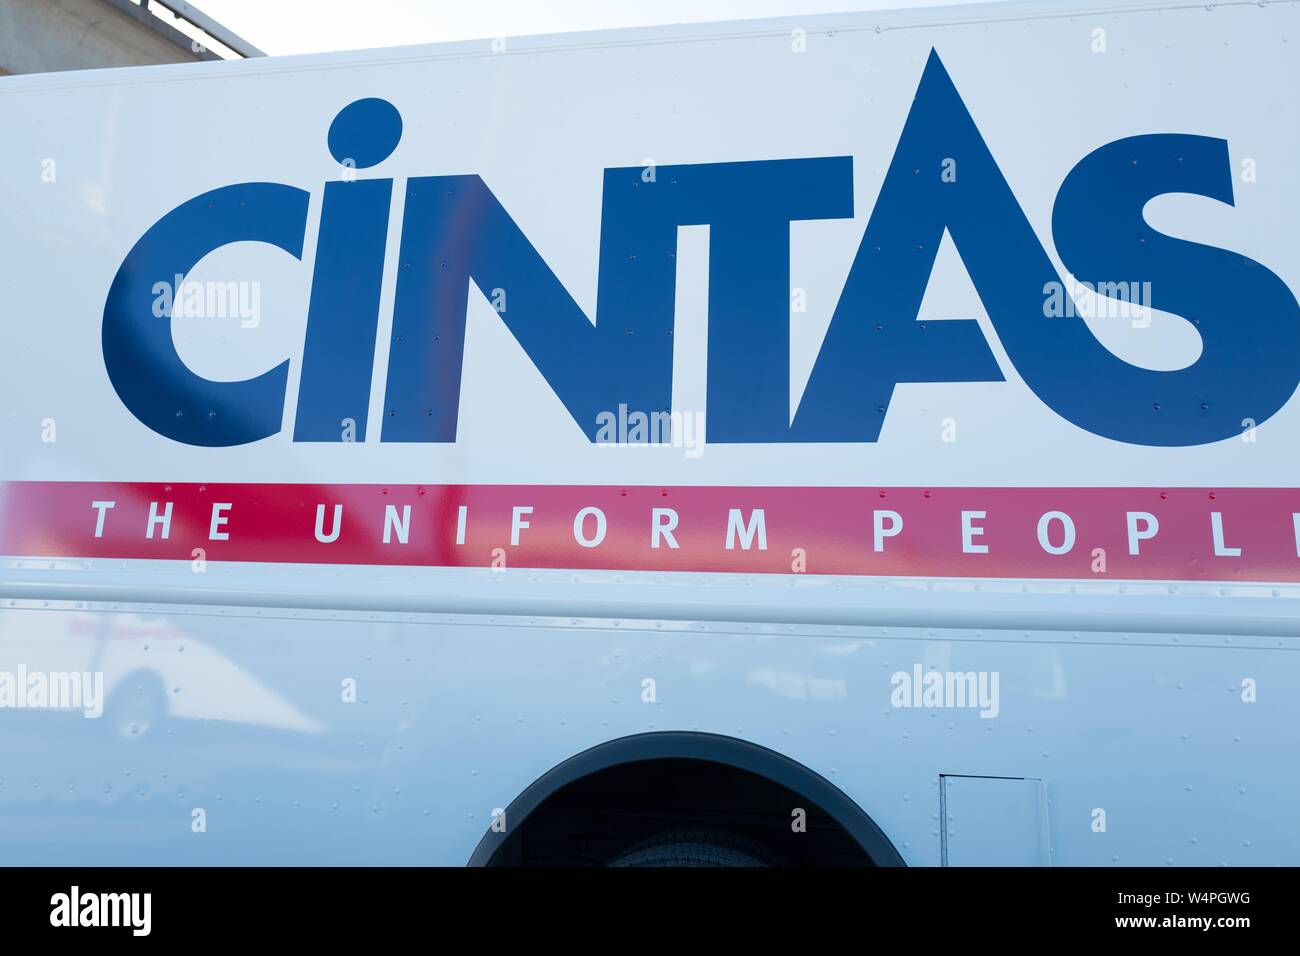 https://c8.alamy.com/comp/W4PGWG/side-view-of-vehicle-with-logo-for-cintas-uniform-delivery-service-in-san-leandro-california-september-10-2018-W4PGWG.jpg